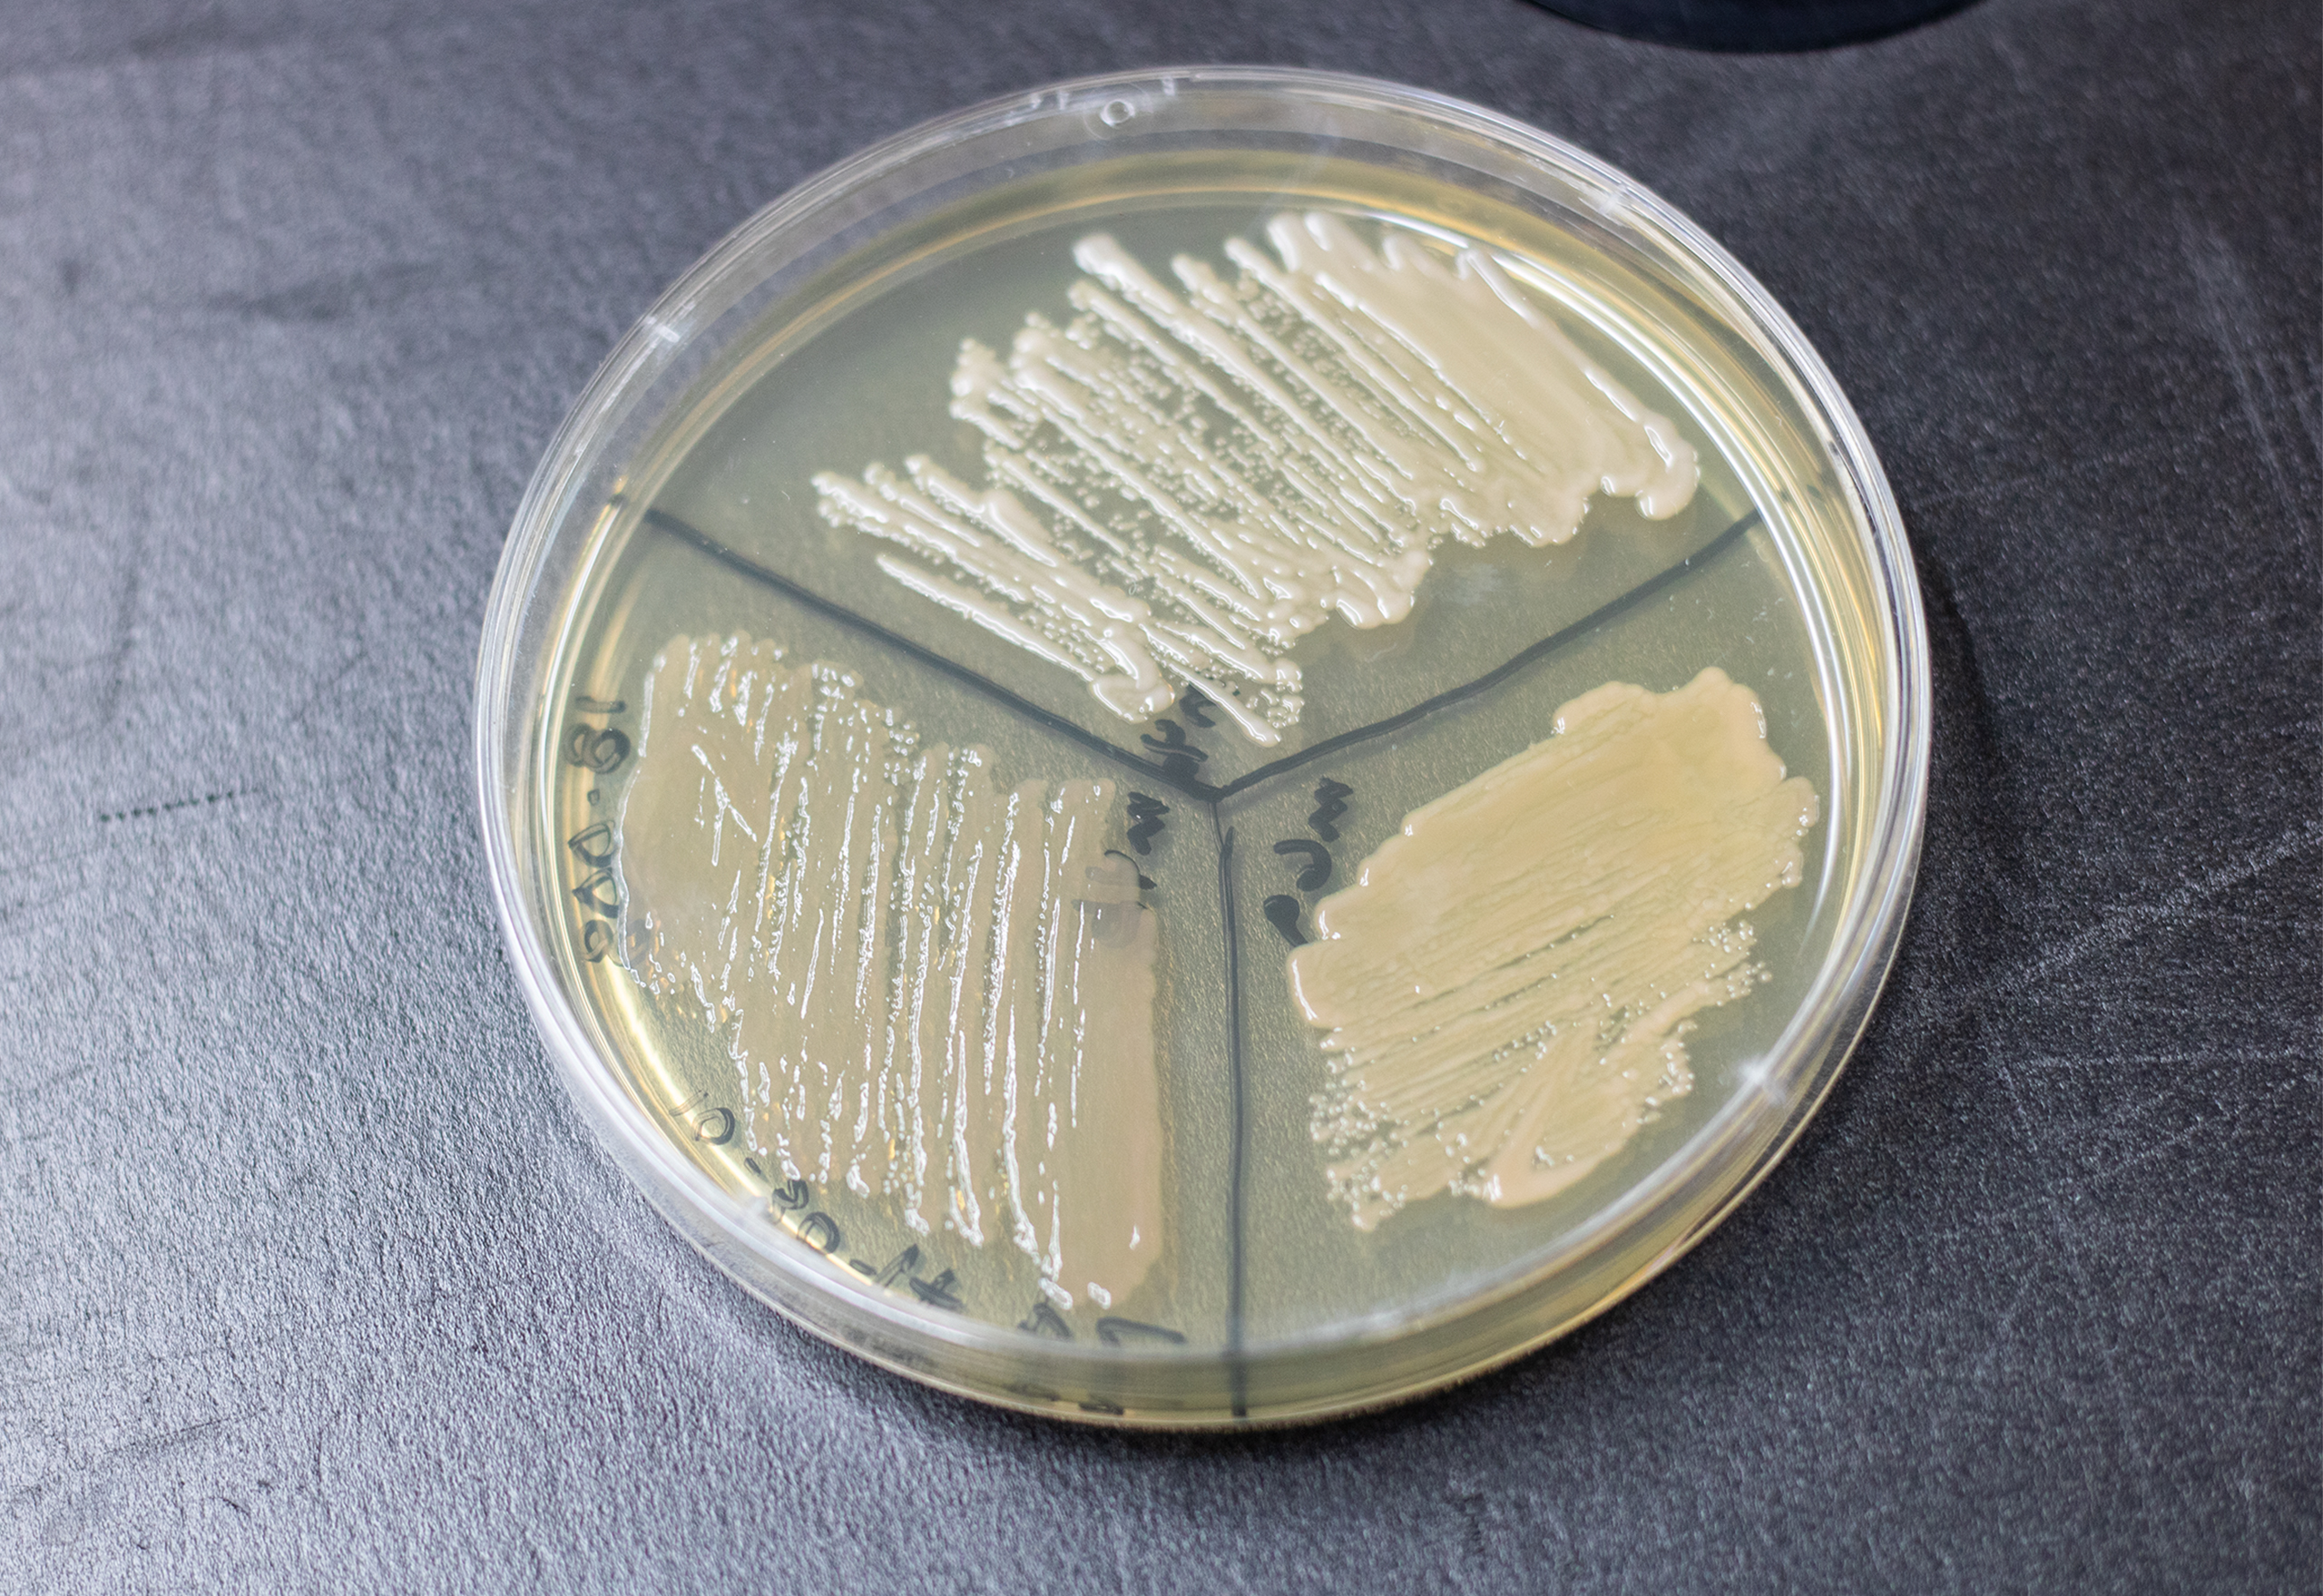 Petri dish filled with agar and divided into thirds.  Each third has a culture growing in it.  